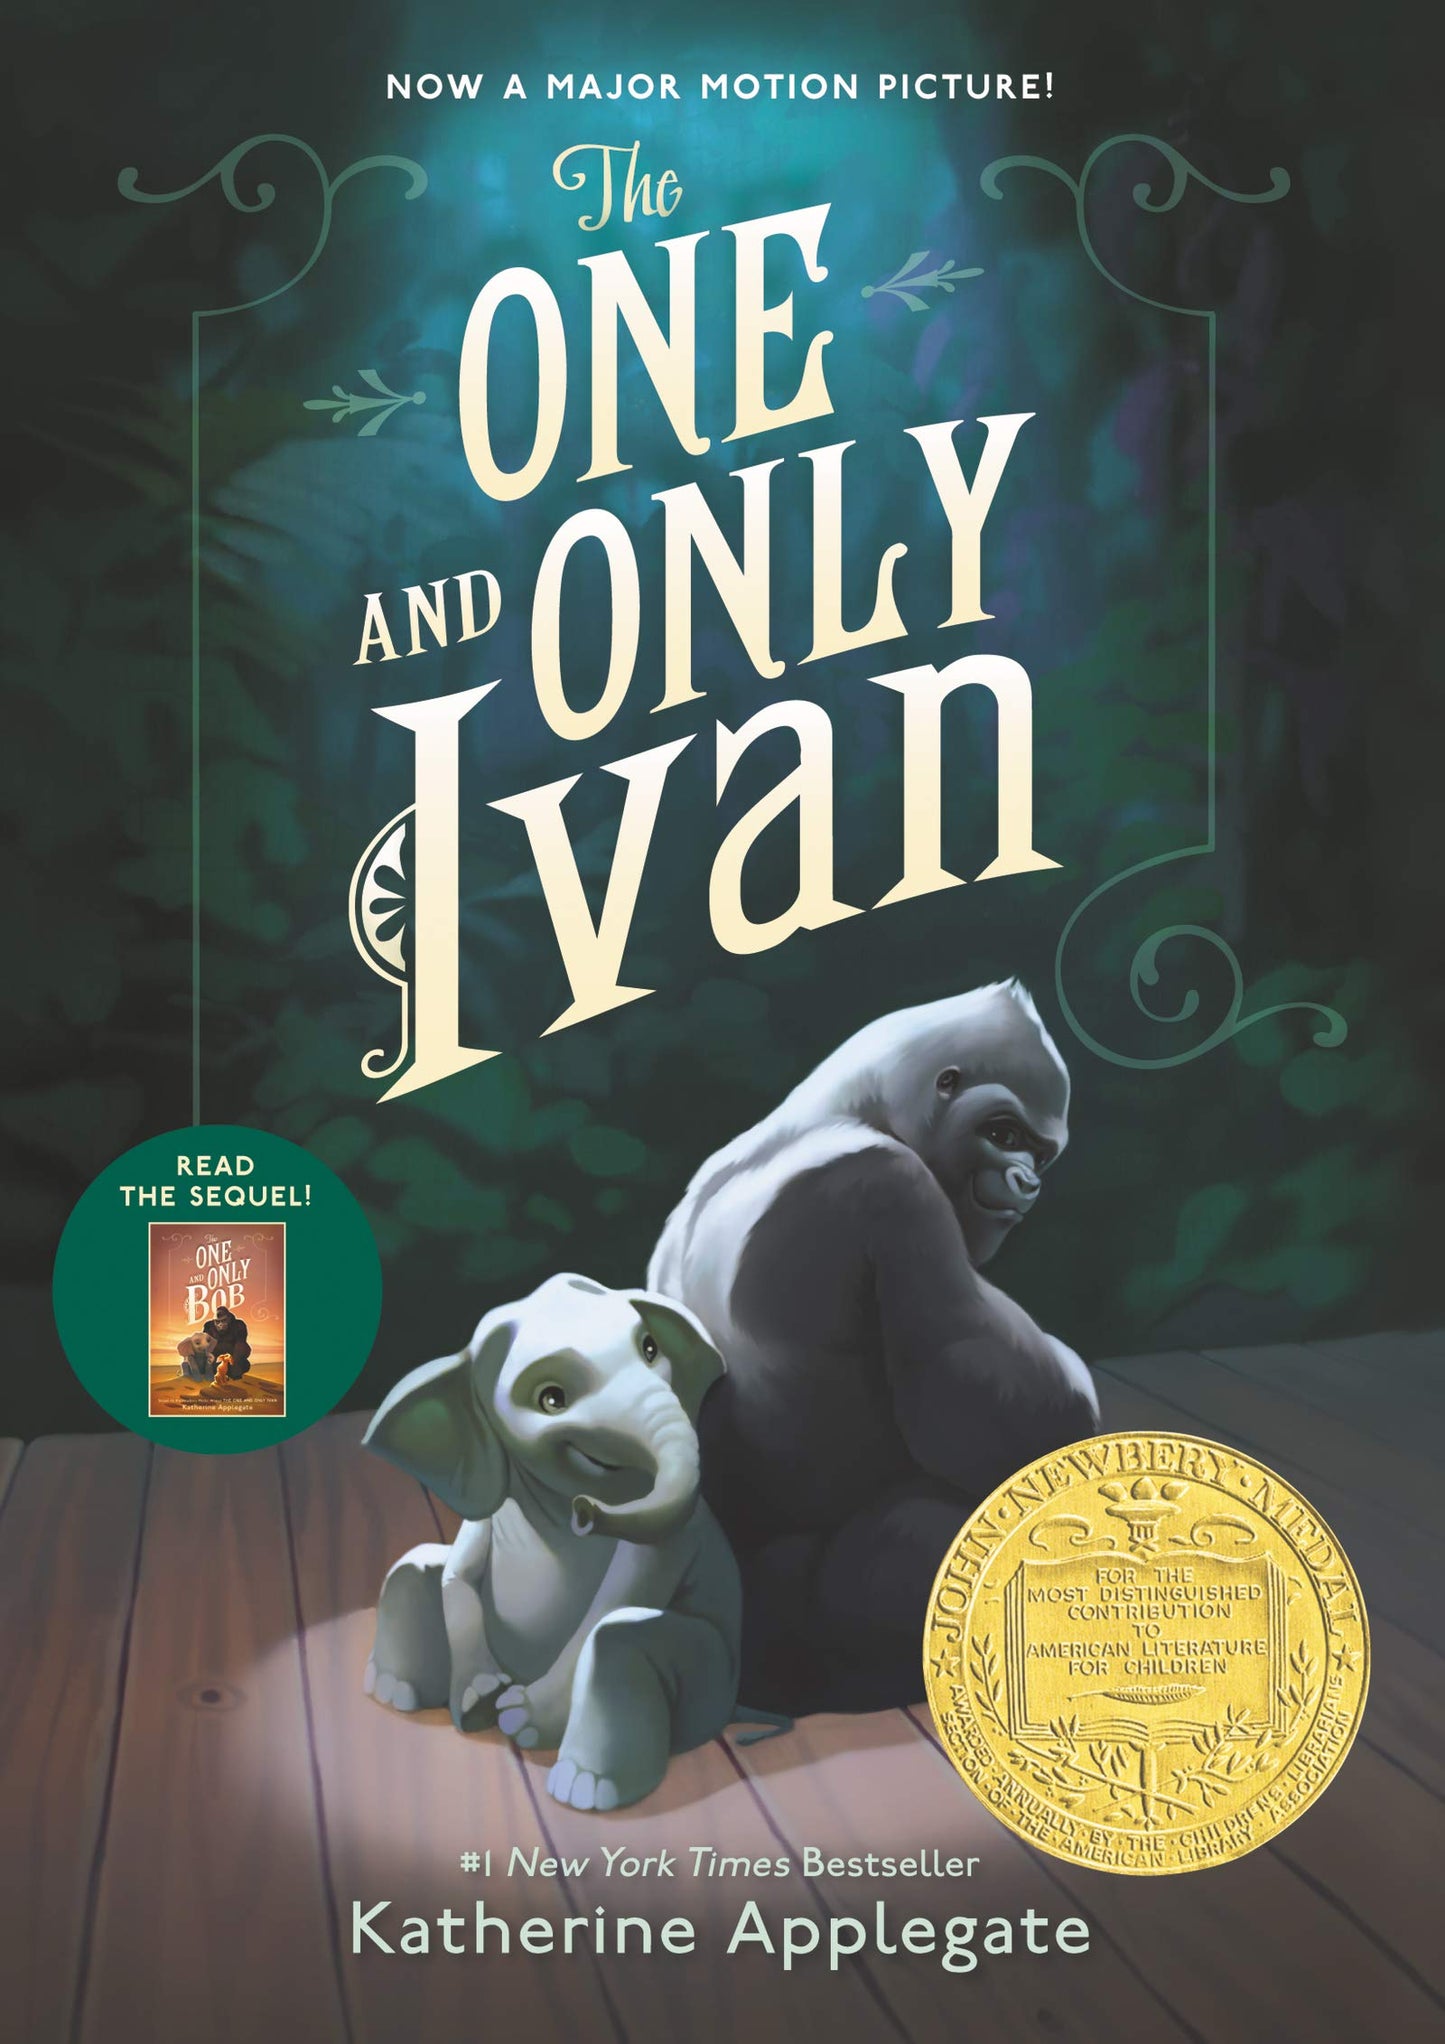 One and Only Ivan: A Newbery Award Winner